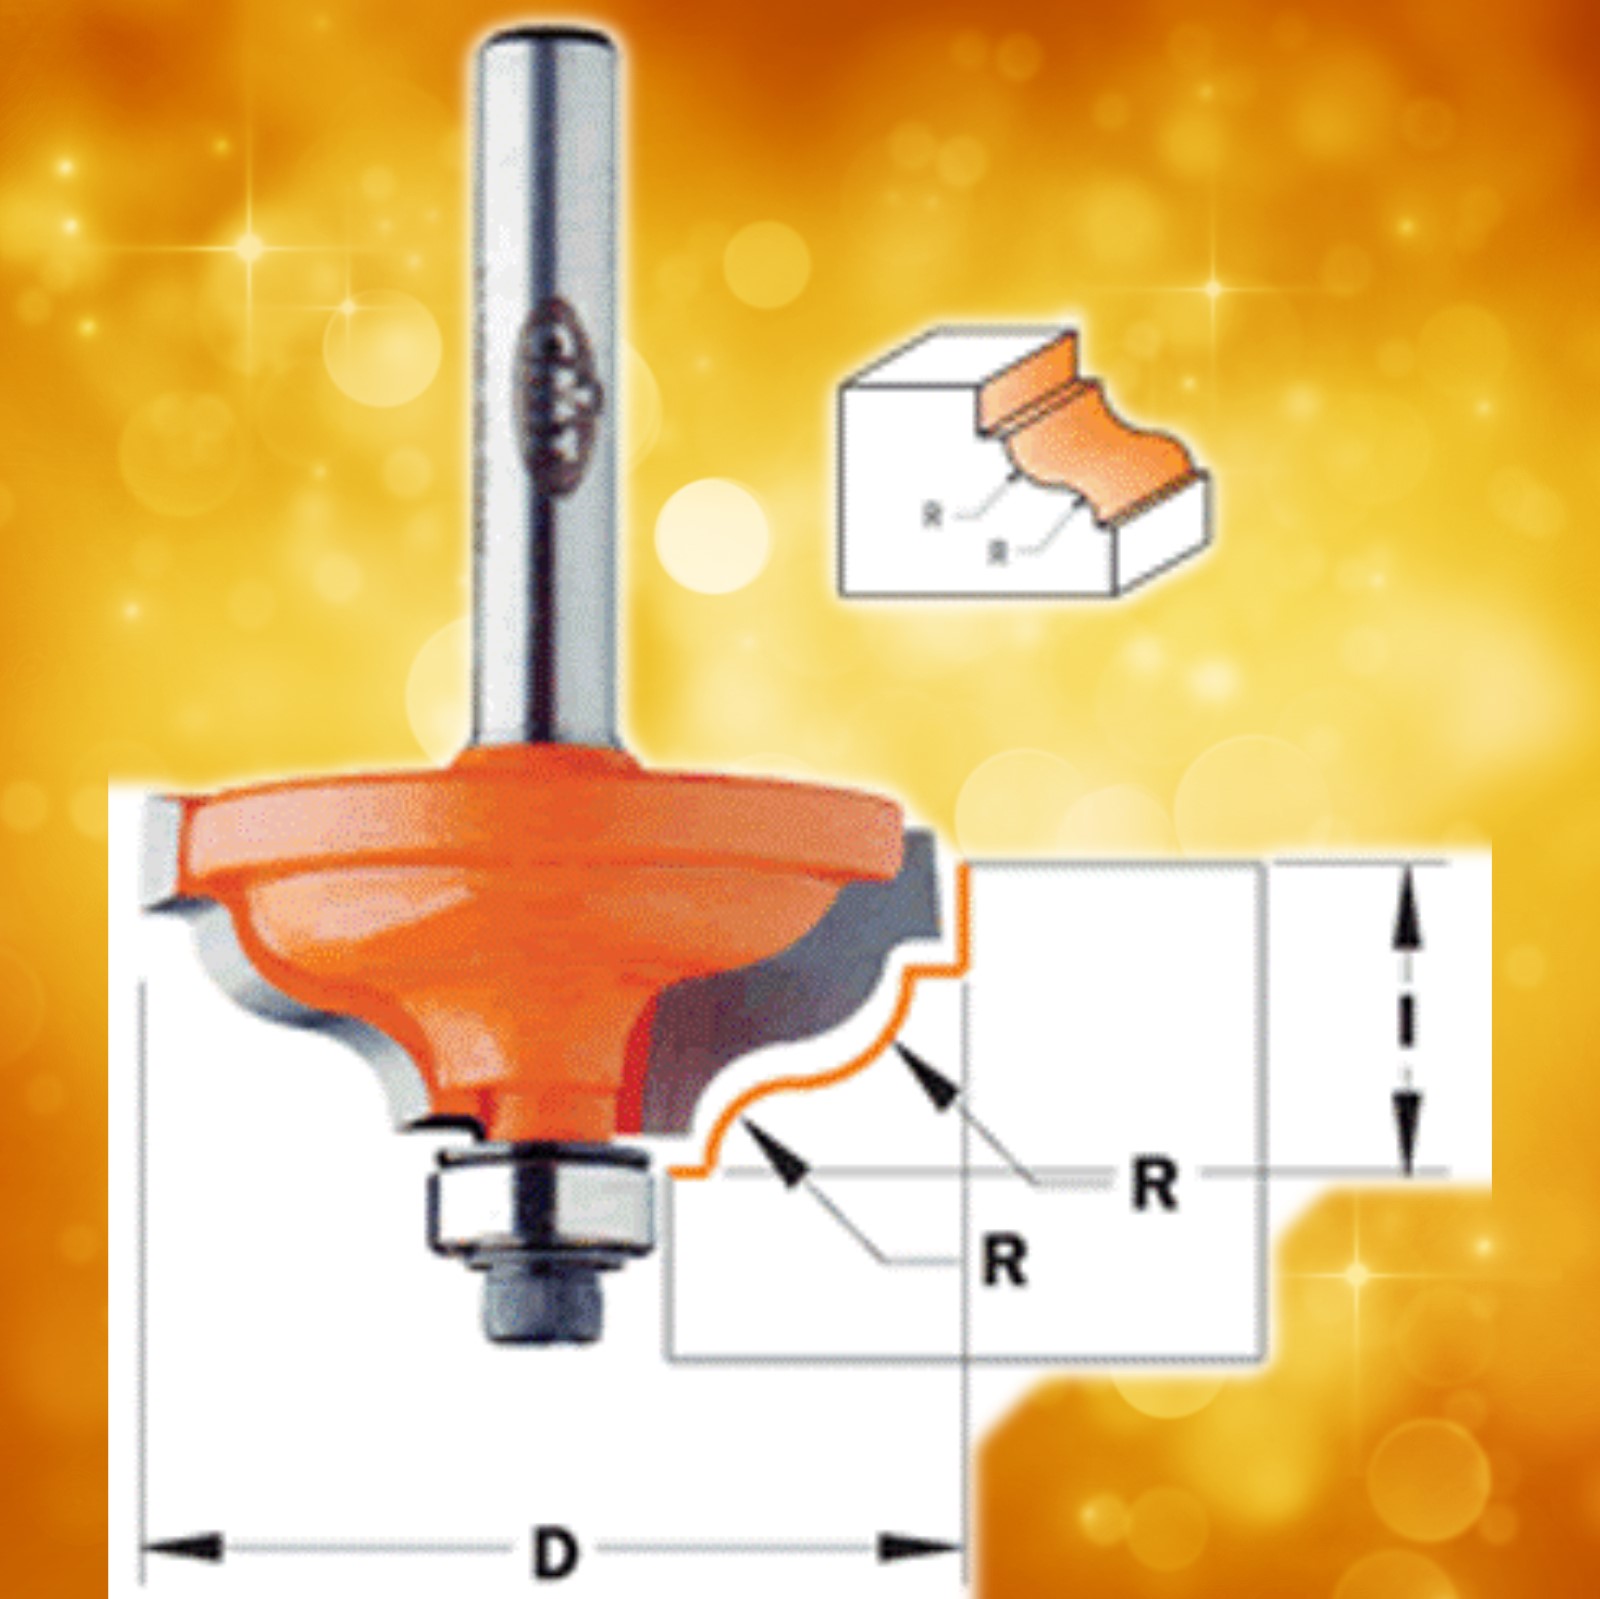 CMT Ogee with Fillet Router Bit 847.325.11 (Series 847) 3/16" - 9/64" radius, 1/4" shank